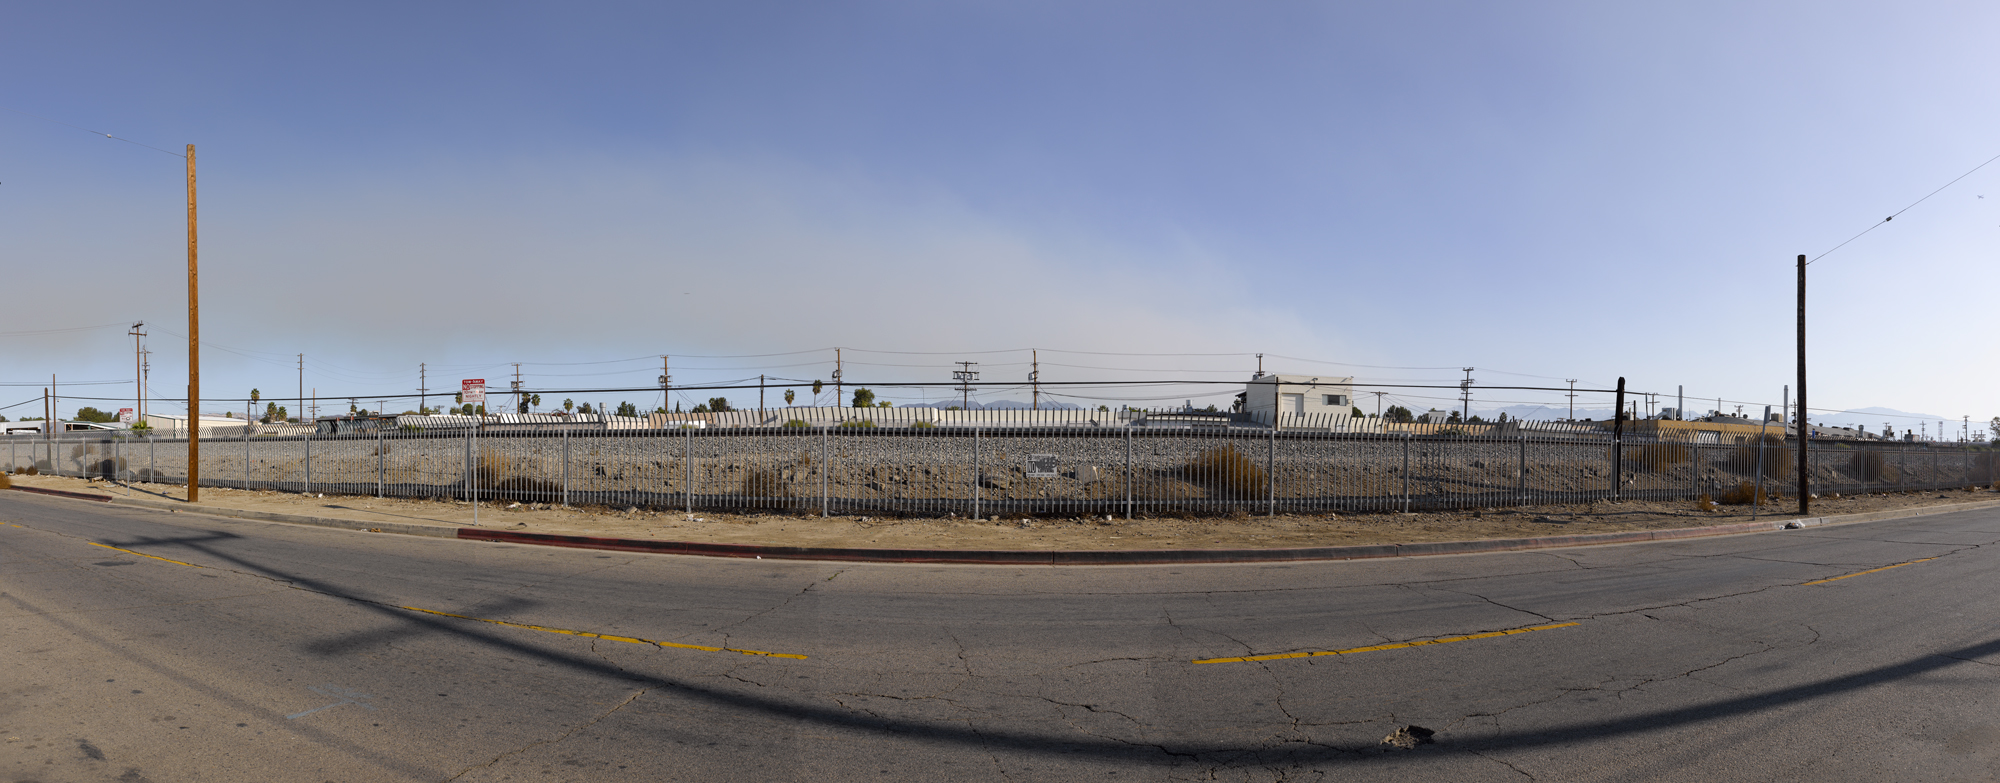 Raymer Pan, cylinder style pan, Richard Lund, wide angle Los Angeles